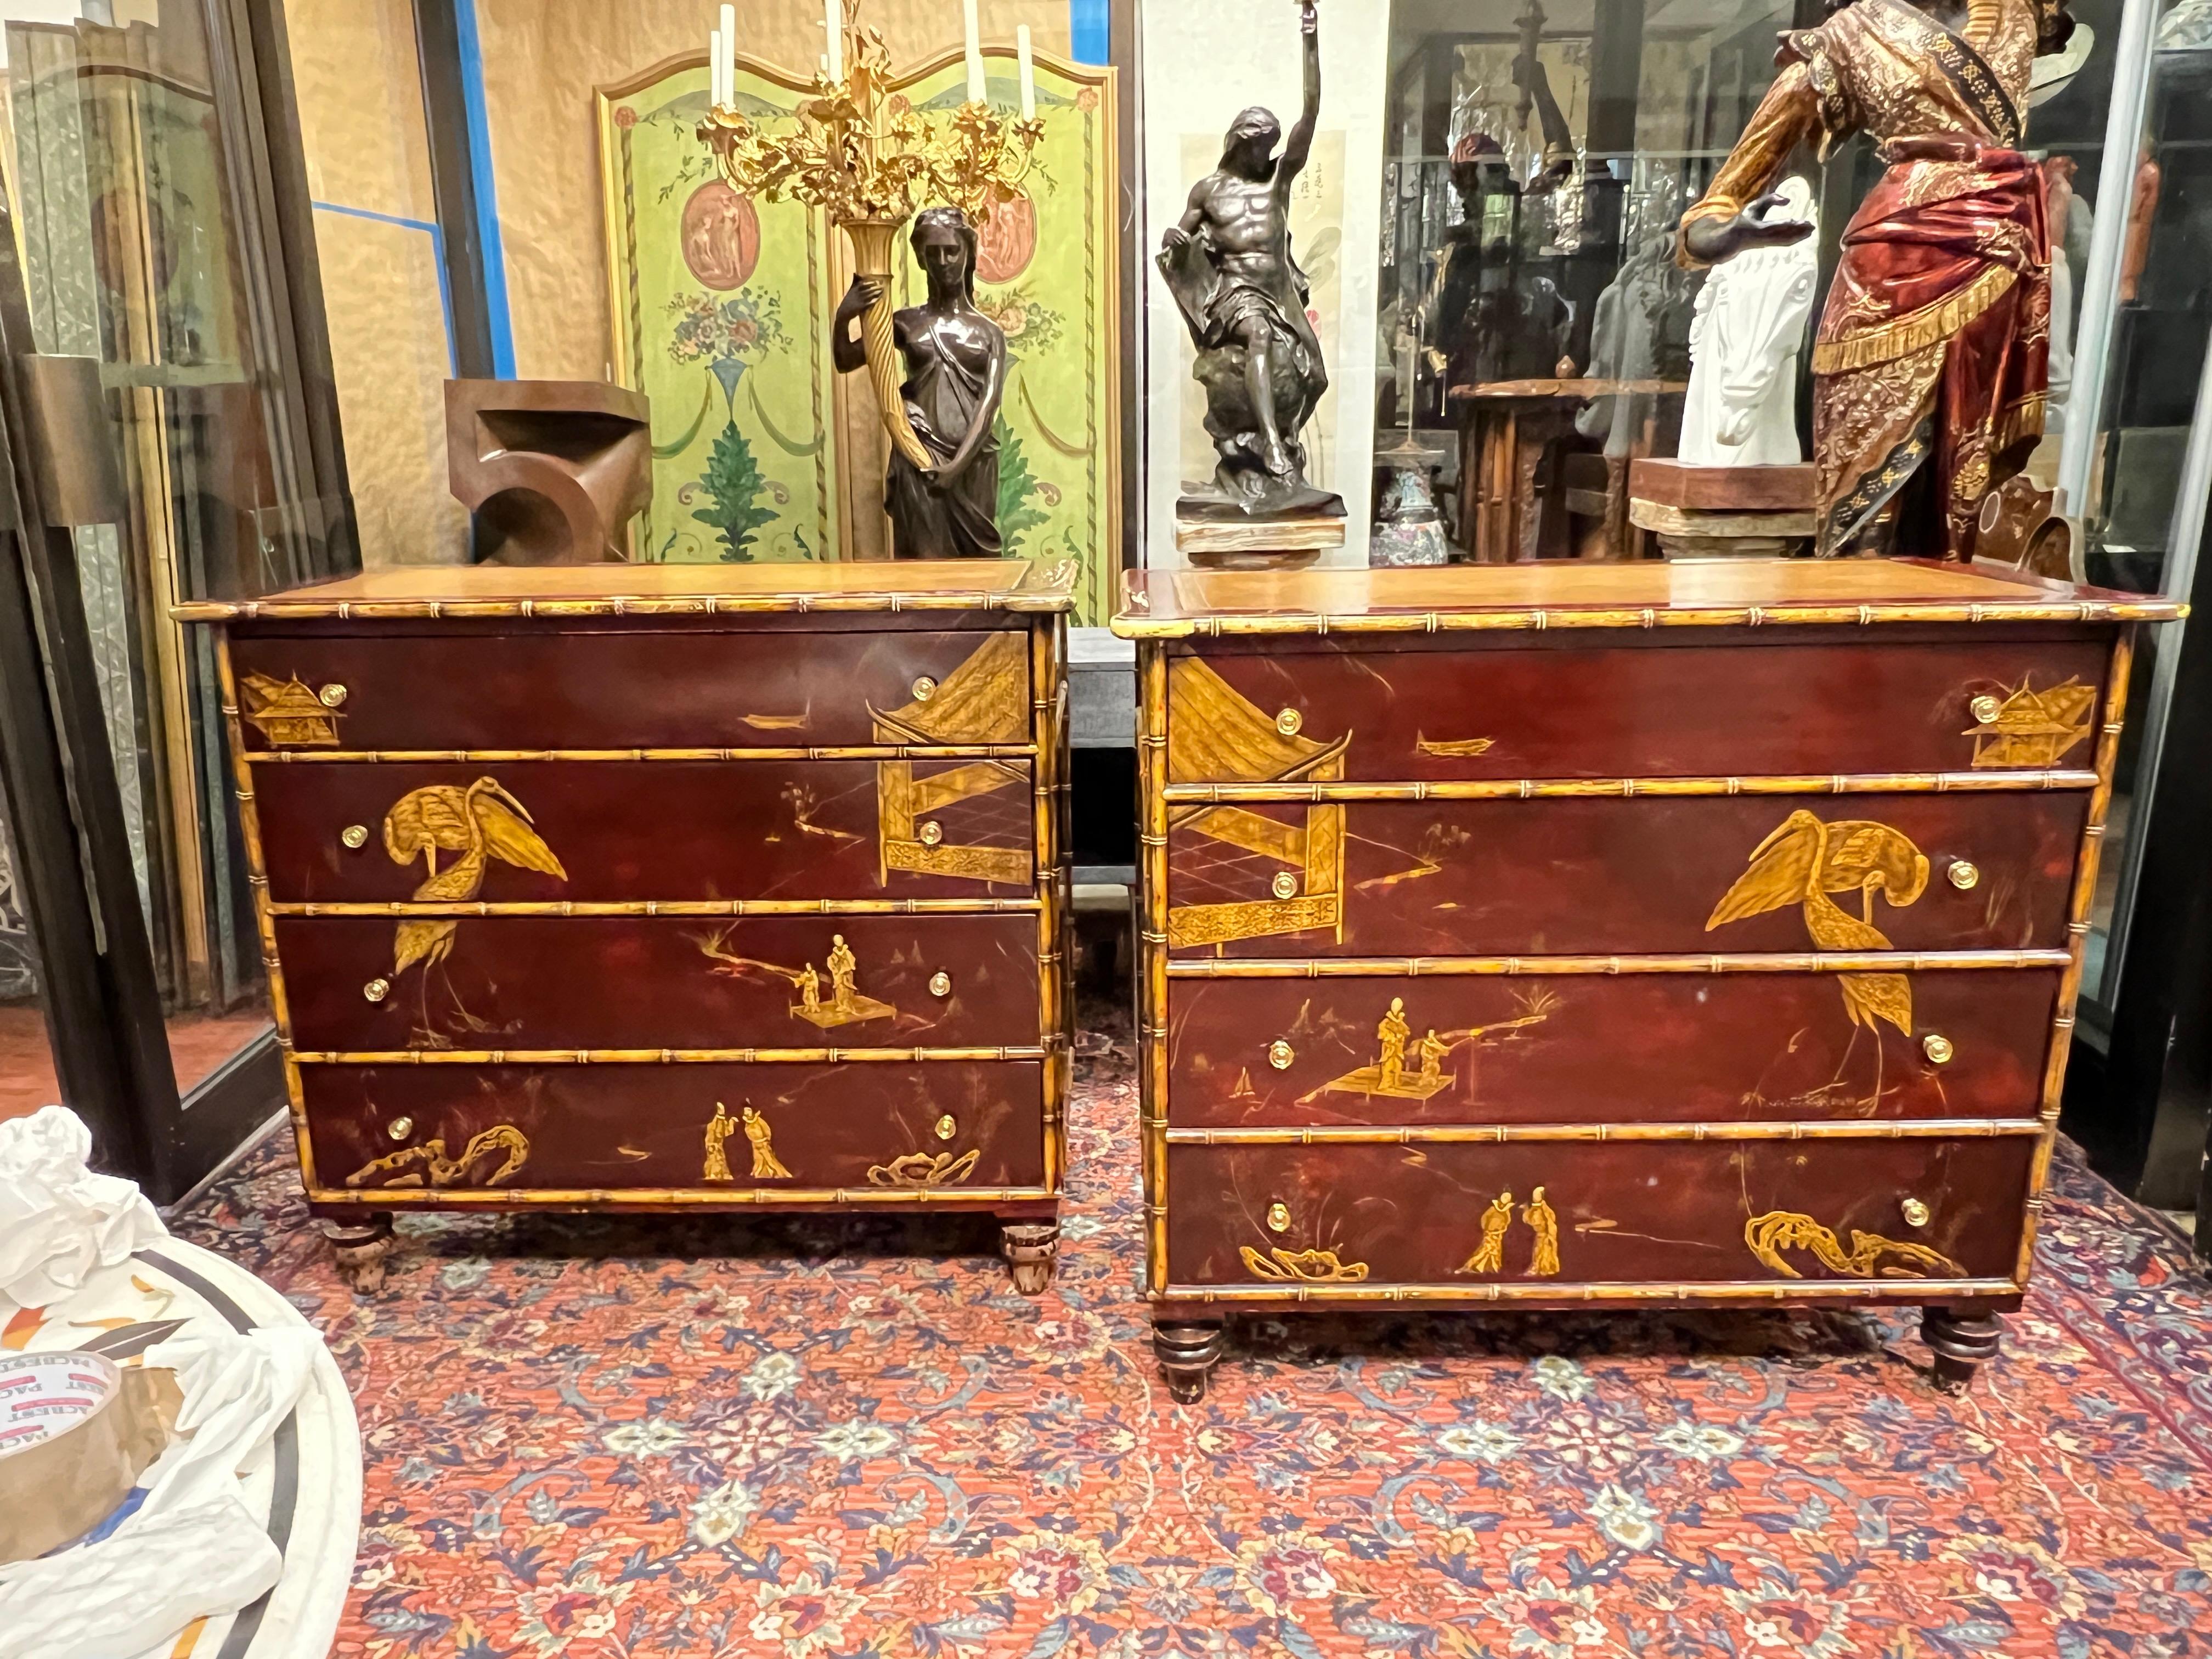 Pair of finely crafted chests of drawers in the chinoiserie style with lacquered or japanned finish, with faux bamboo frame and charming panels depicting figures, standing cranes, buildings and foliage, with inlaid embossed leather tops with